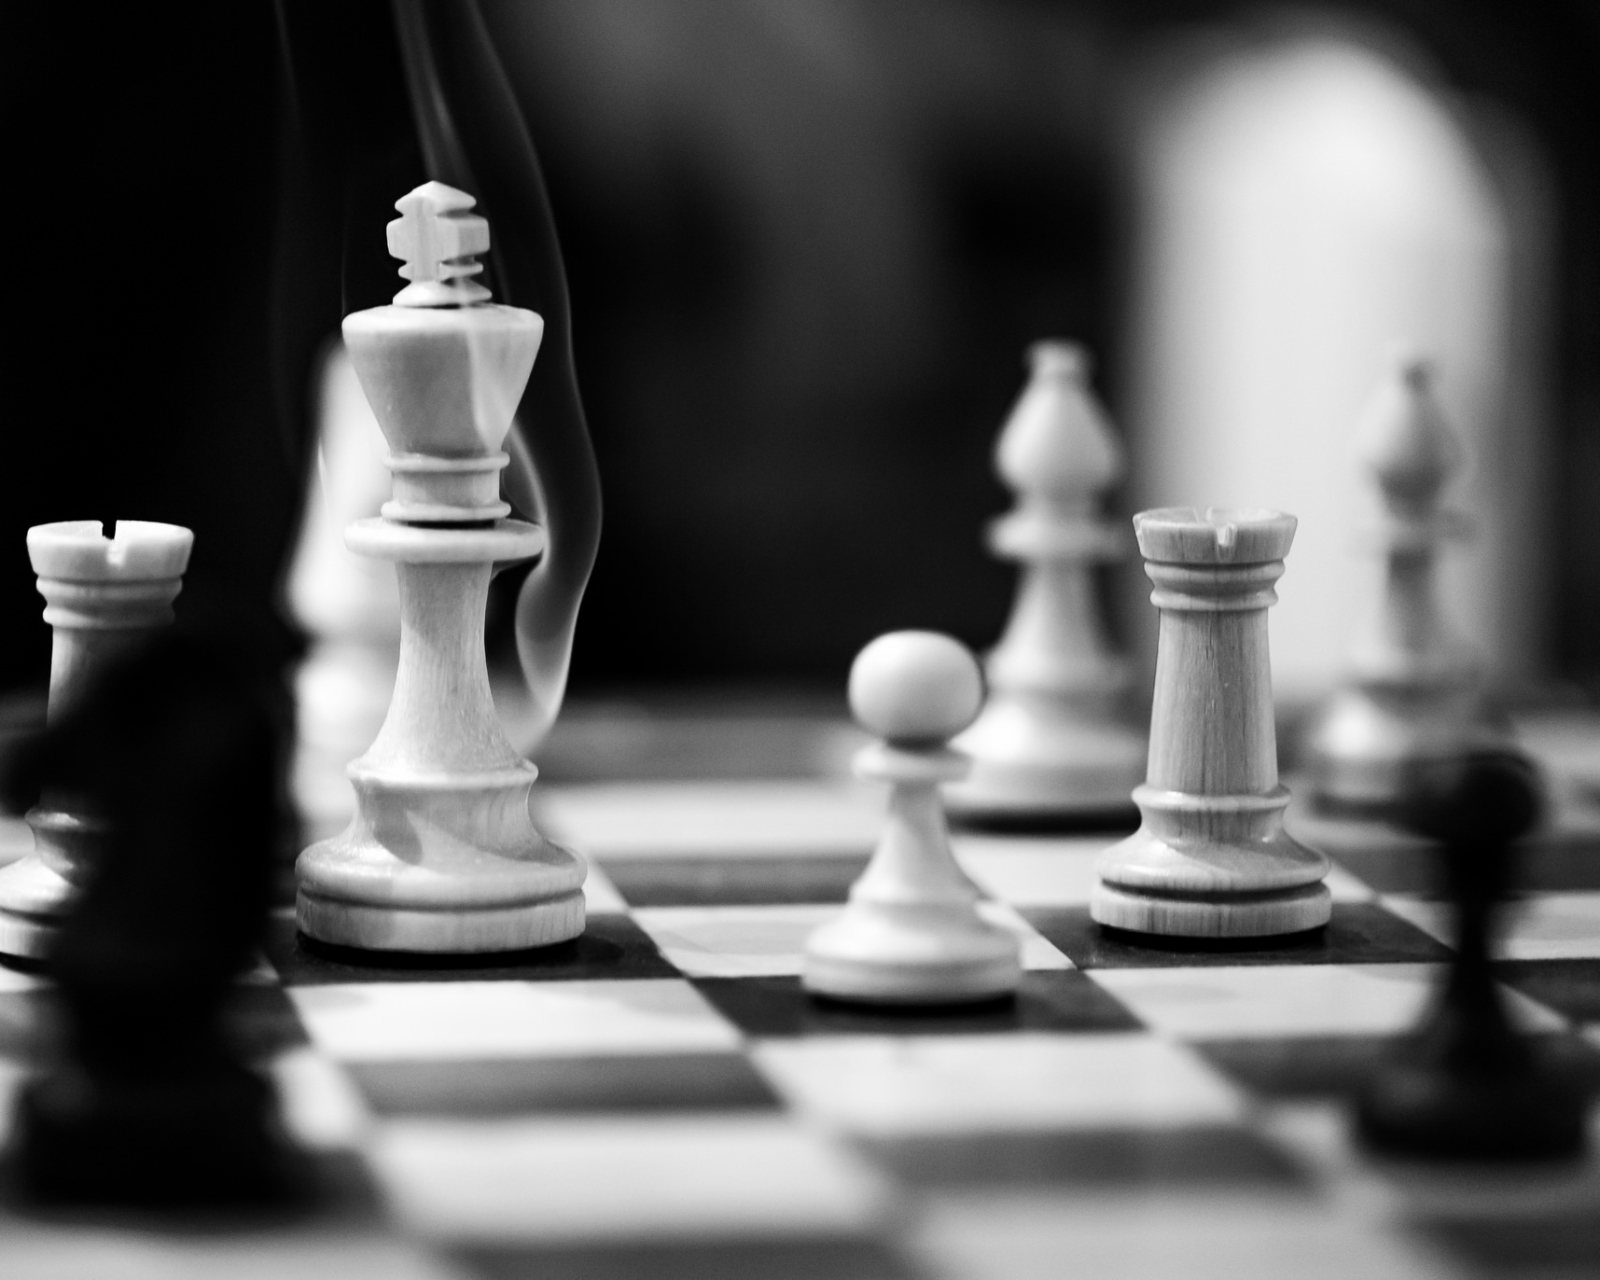 Chess full hd, hdtv, fhd, 1080p wallpapers hd, desktop backgrounds  1920x1080, images and pictures